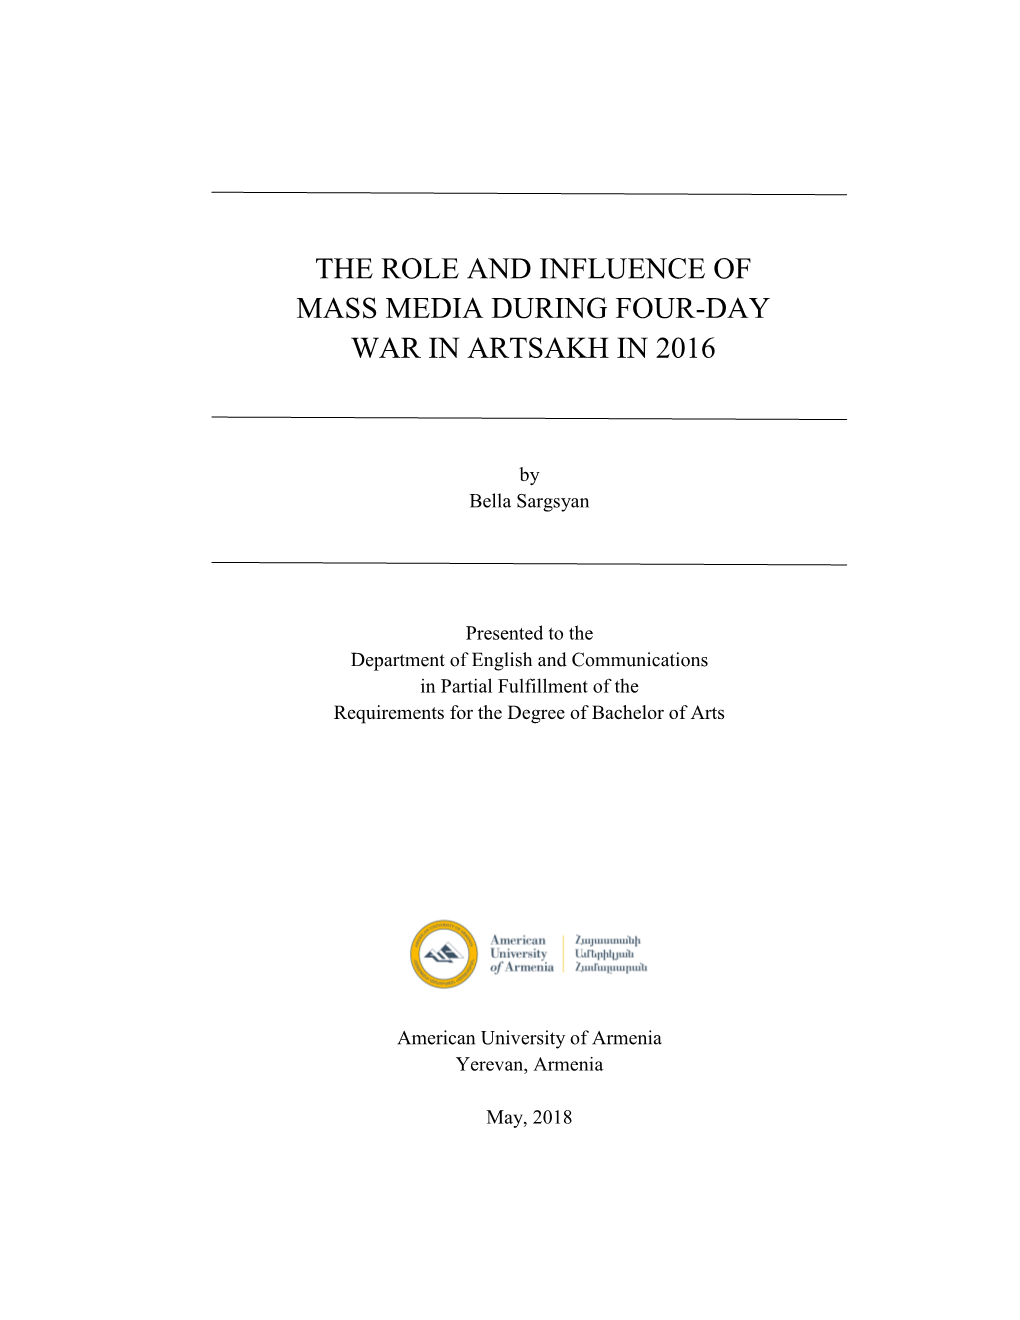 The Role and Influence of Mass Media During Four-Day War in Artsakh in 2016